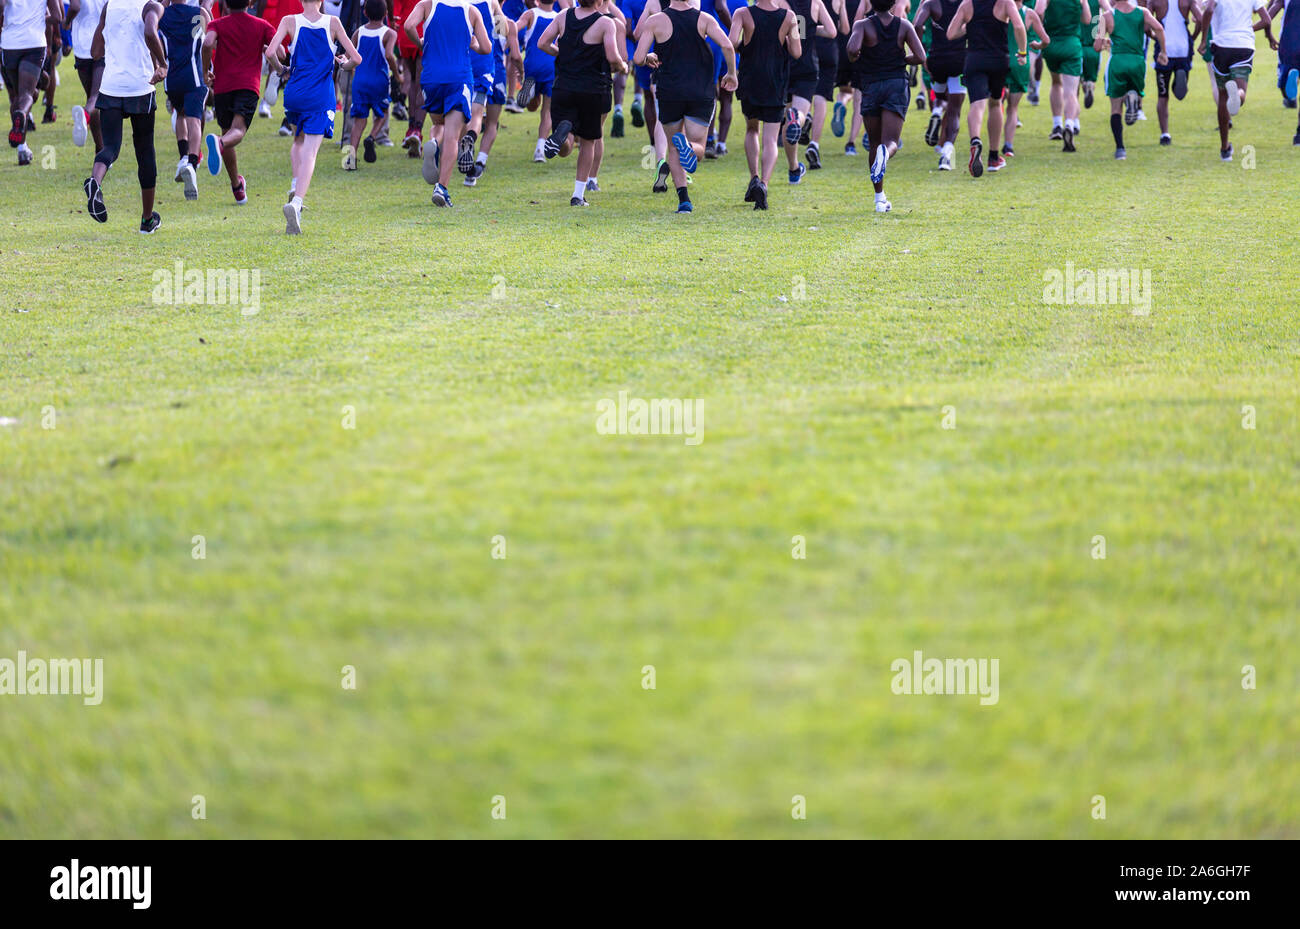 Green Field with Cross Country Race runners at top of image Stock Photo